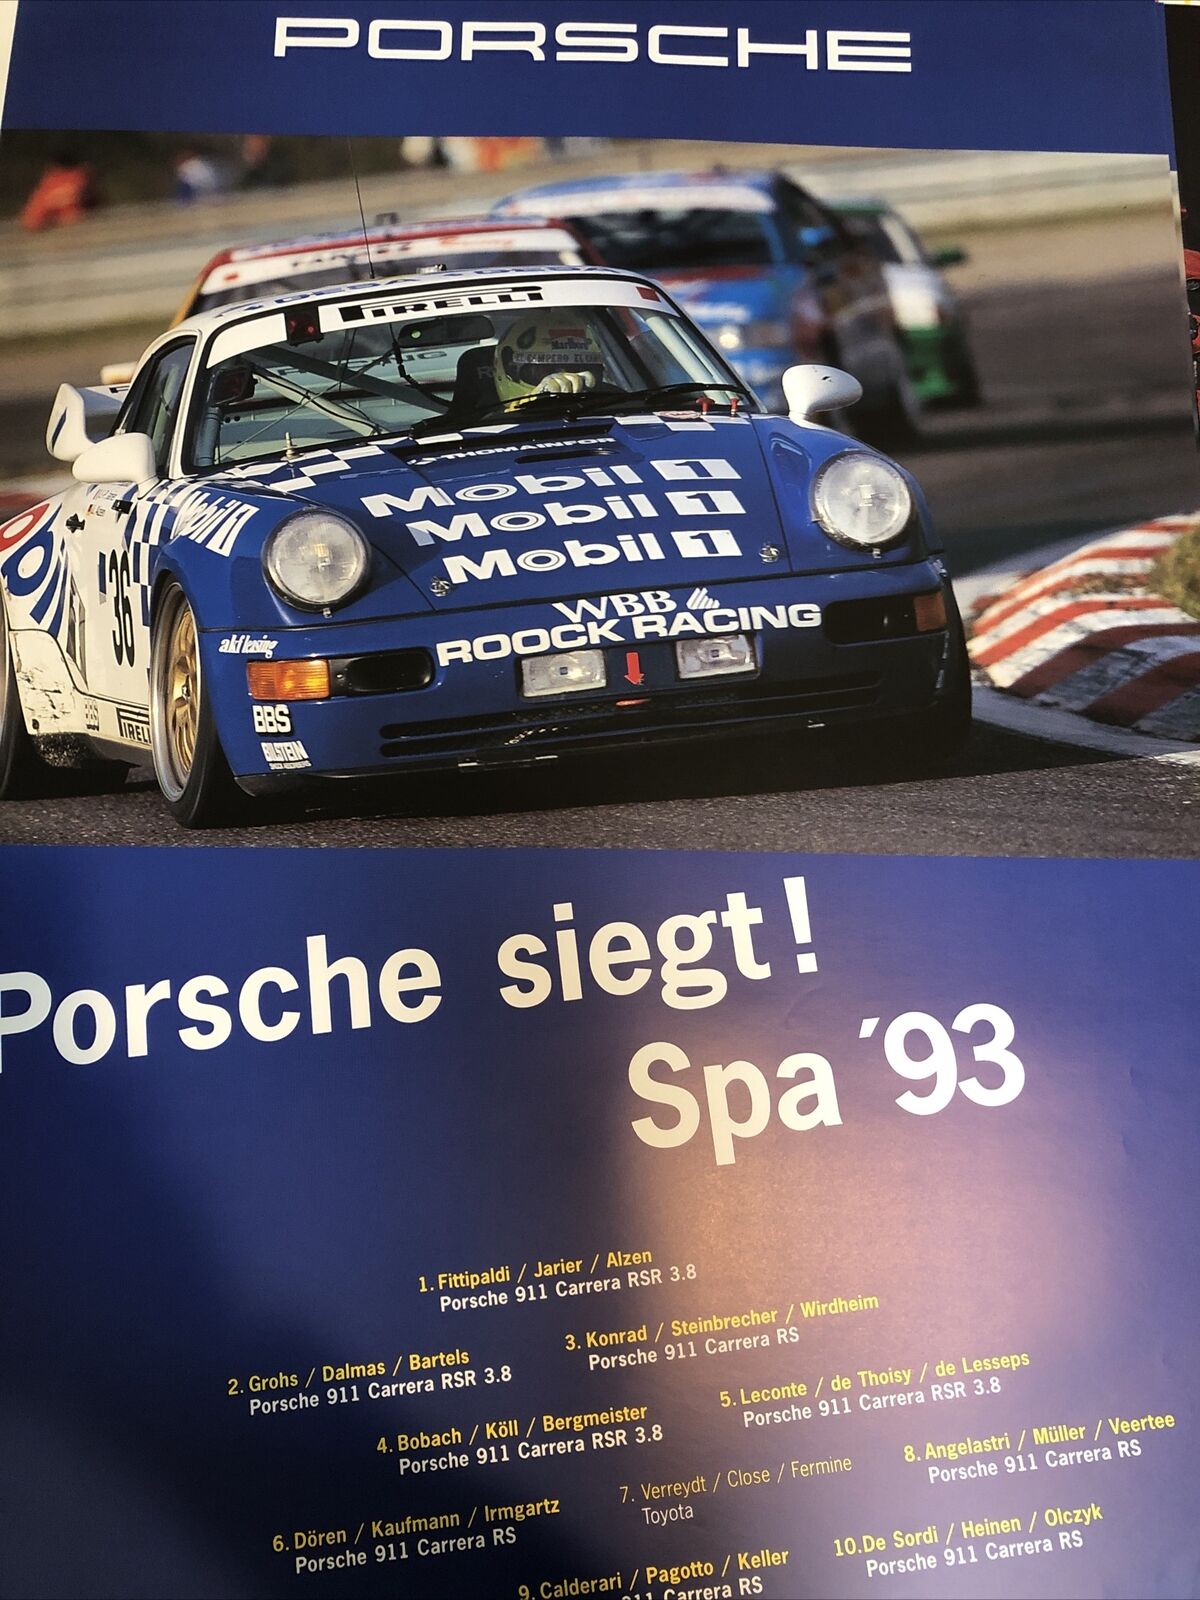 AWESOME Factory Porsche Poster Siege SPA 93